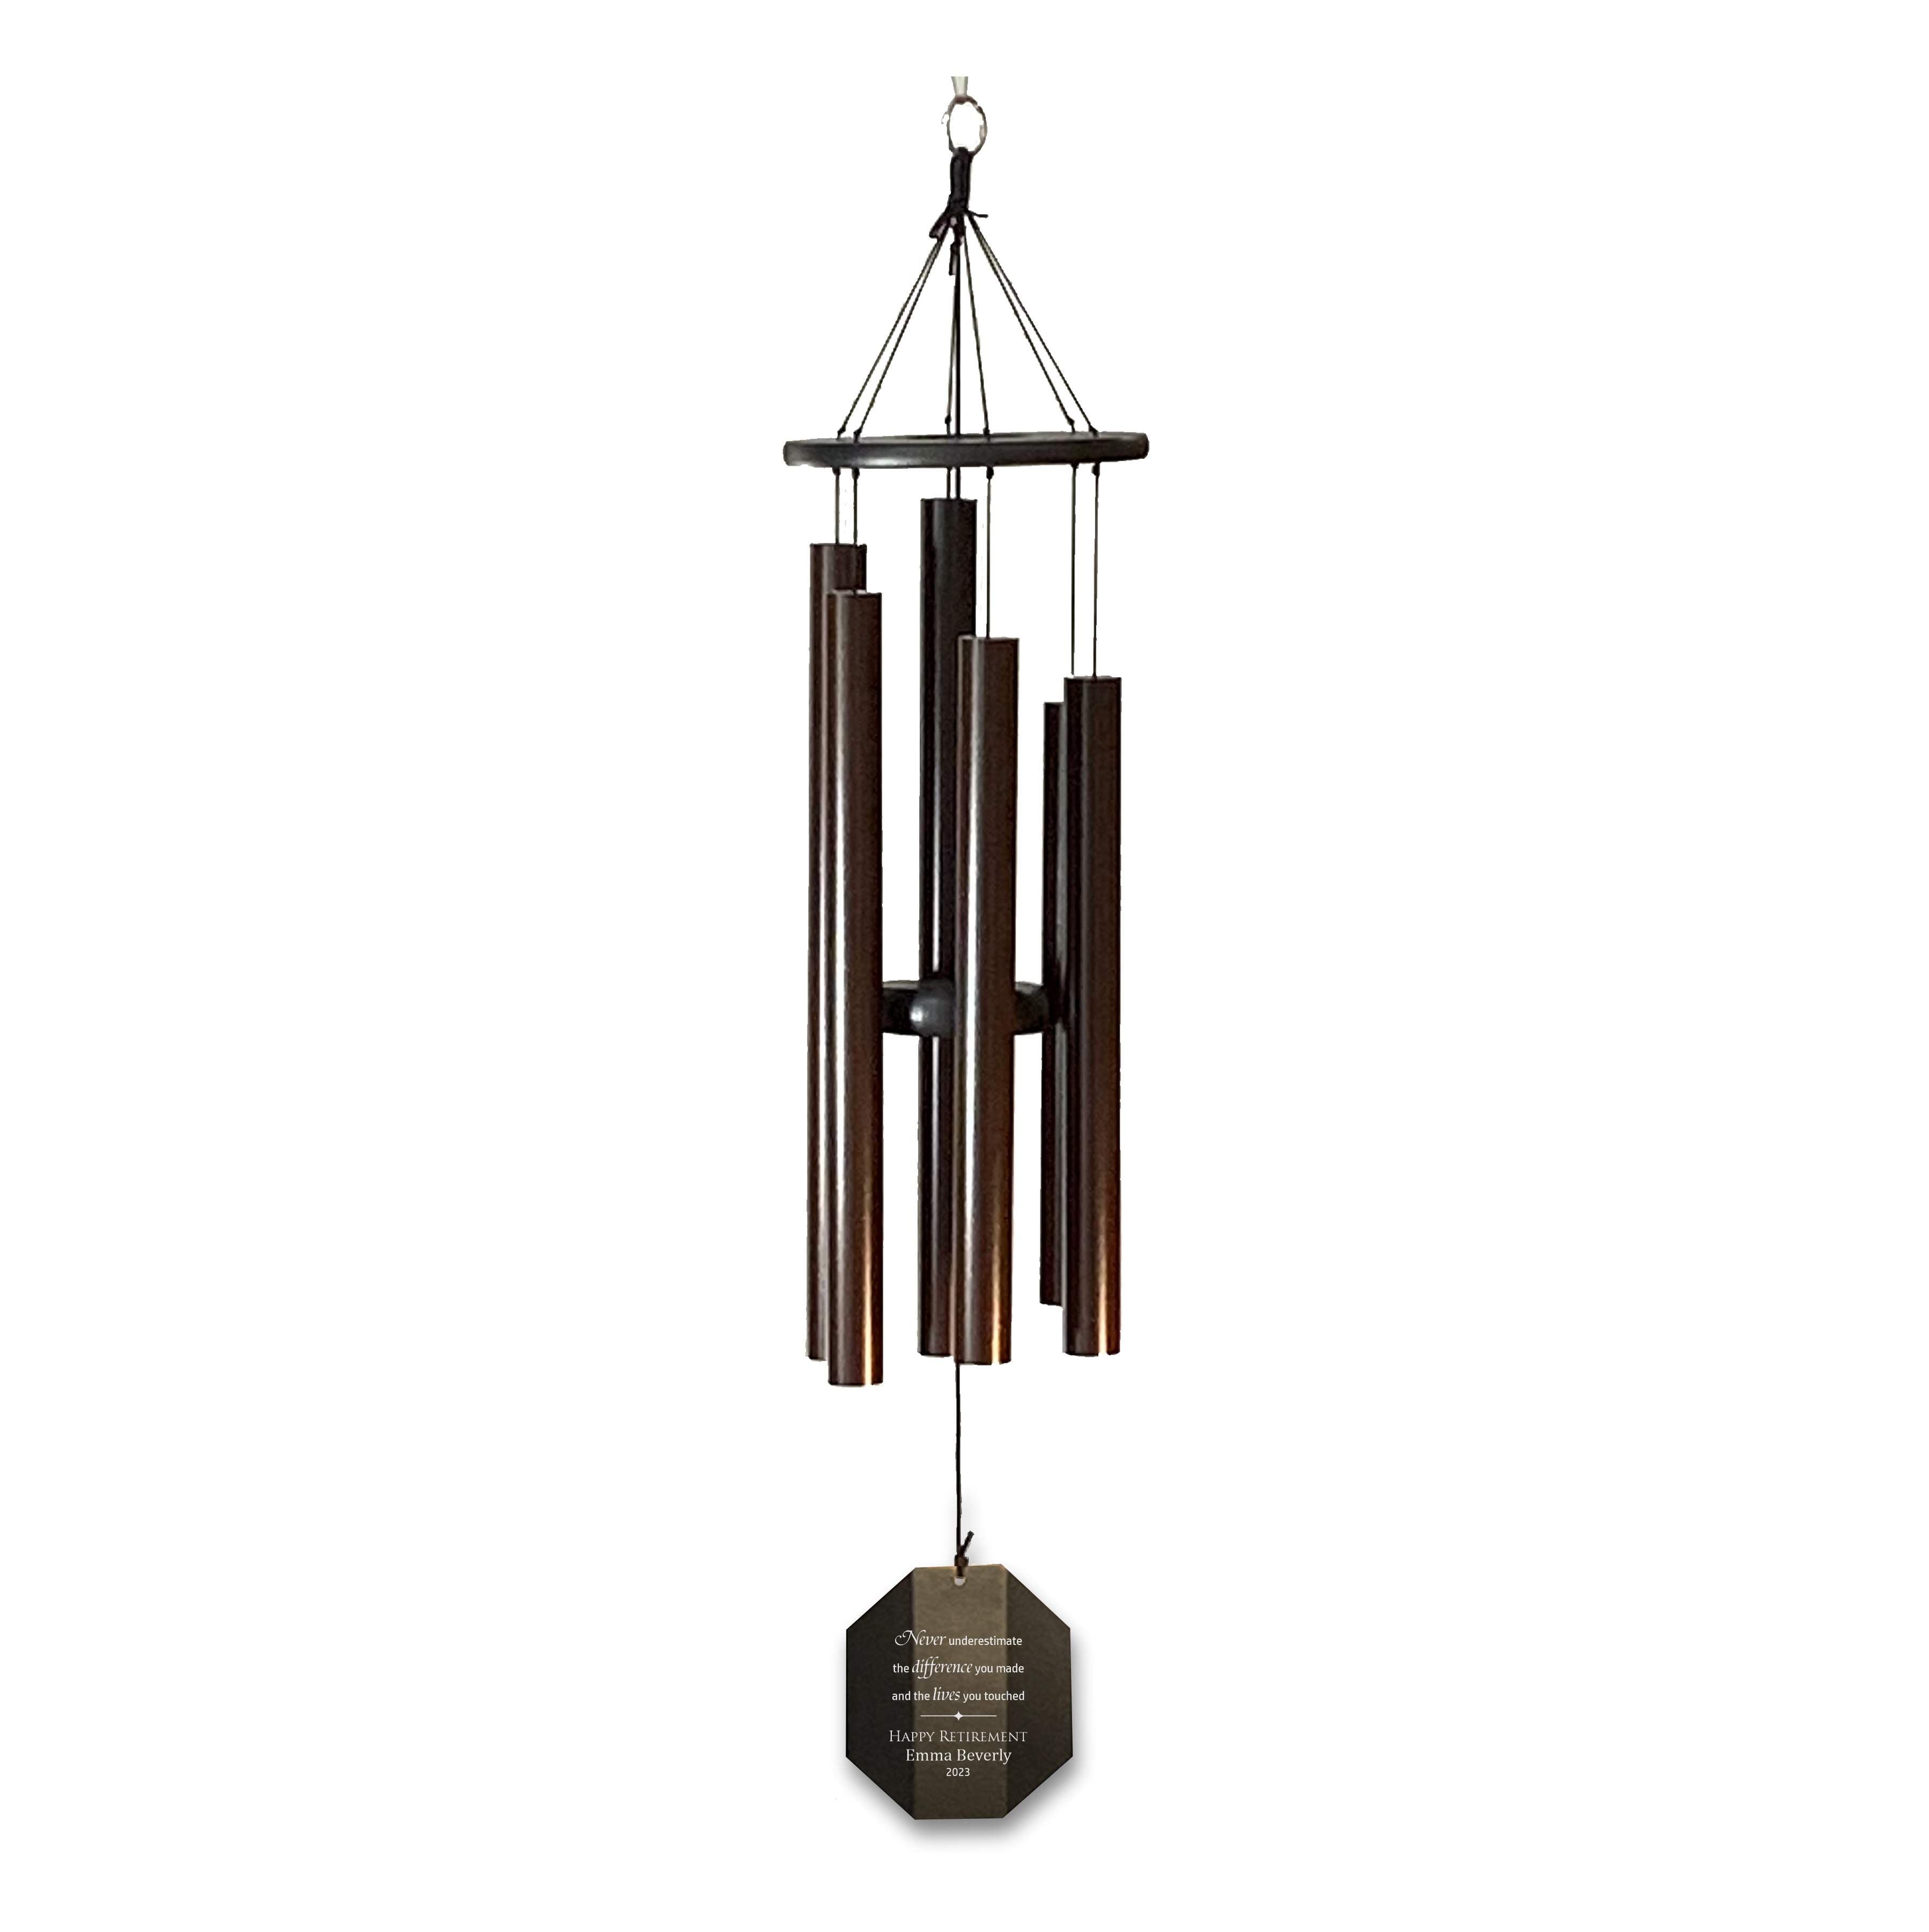 Retirement Wind Chime | Never Underestimate the Difference You Made | Large - Deep Tones | Made In USA